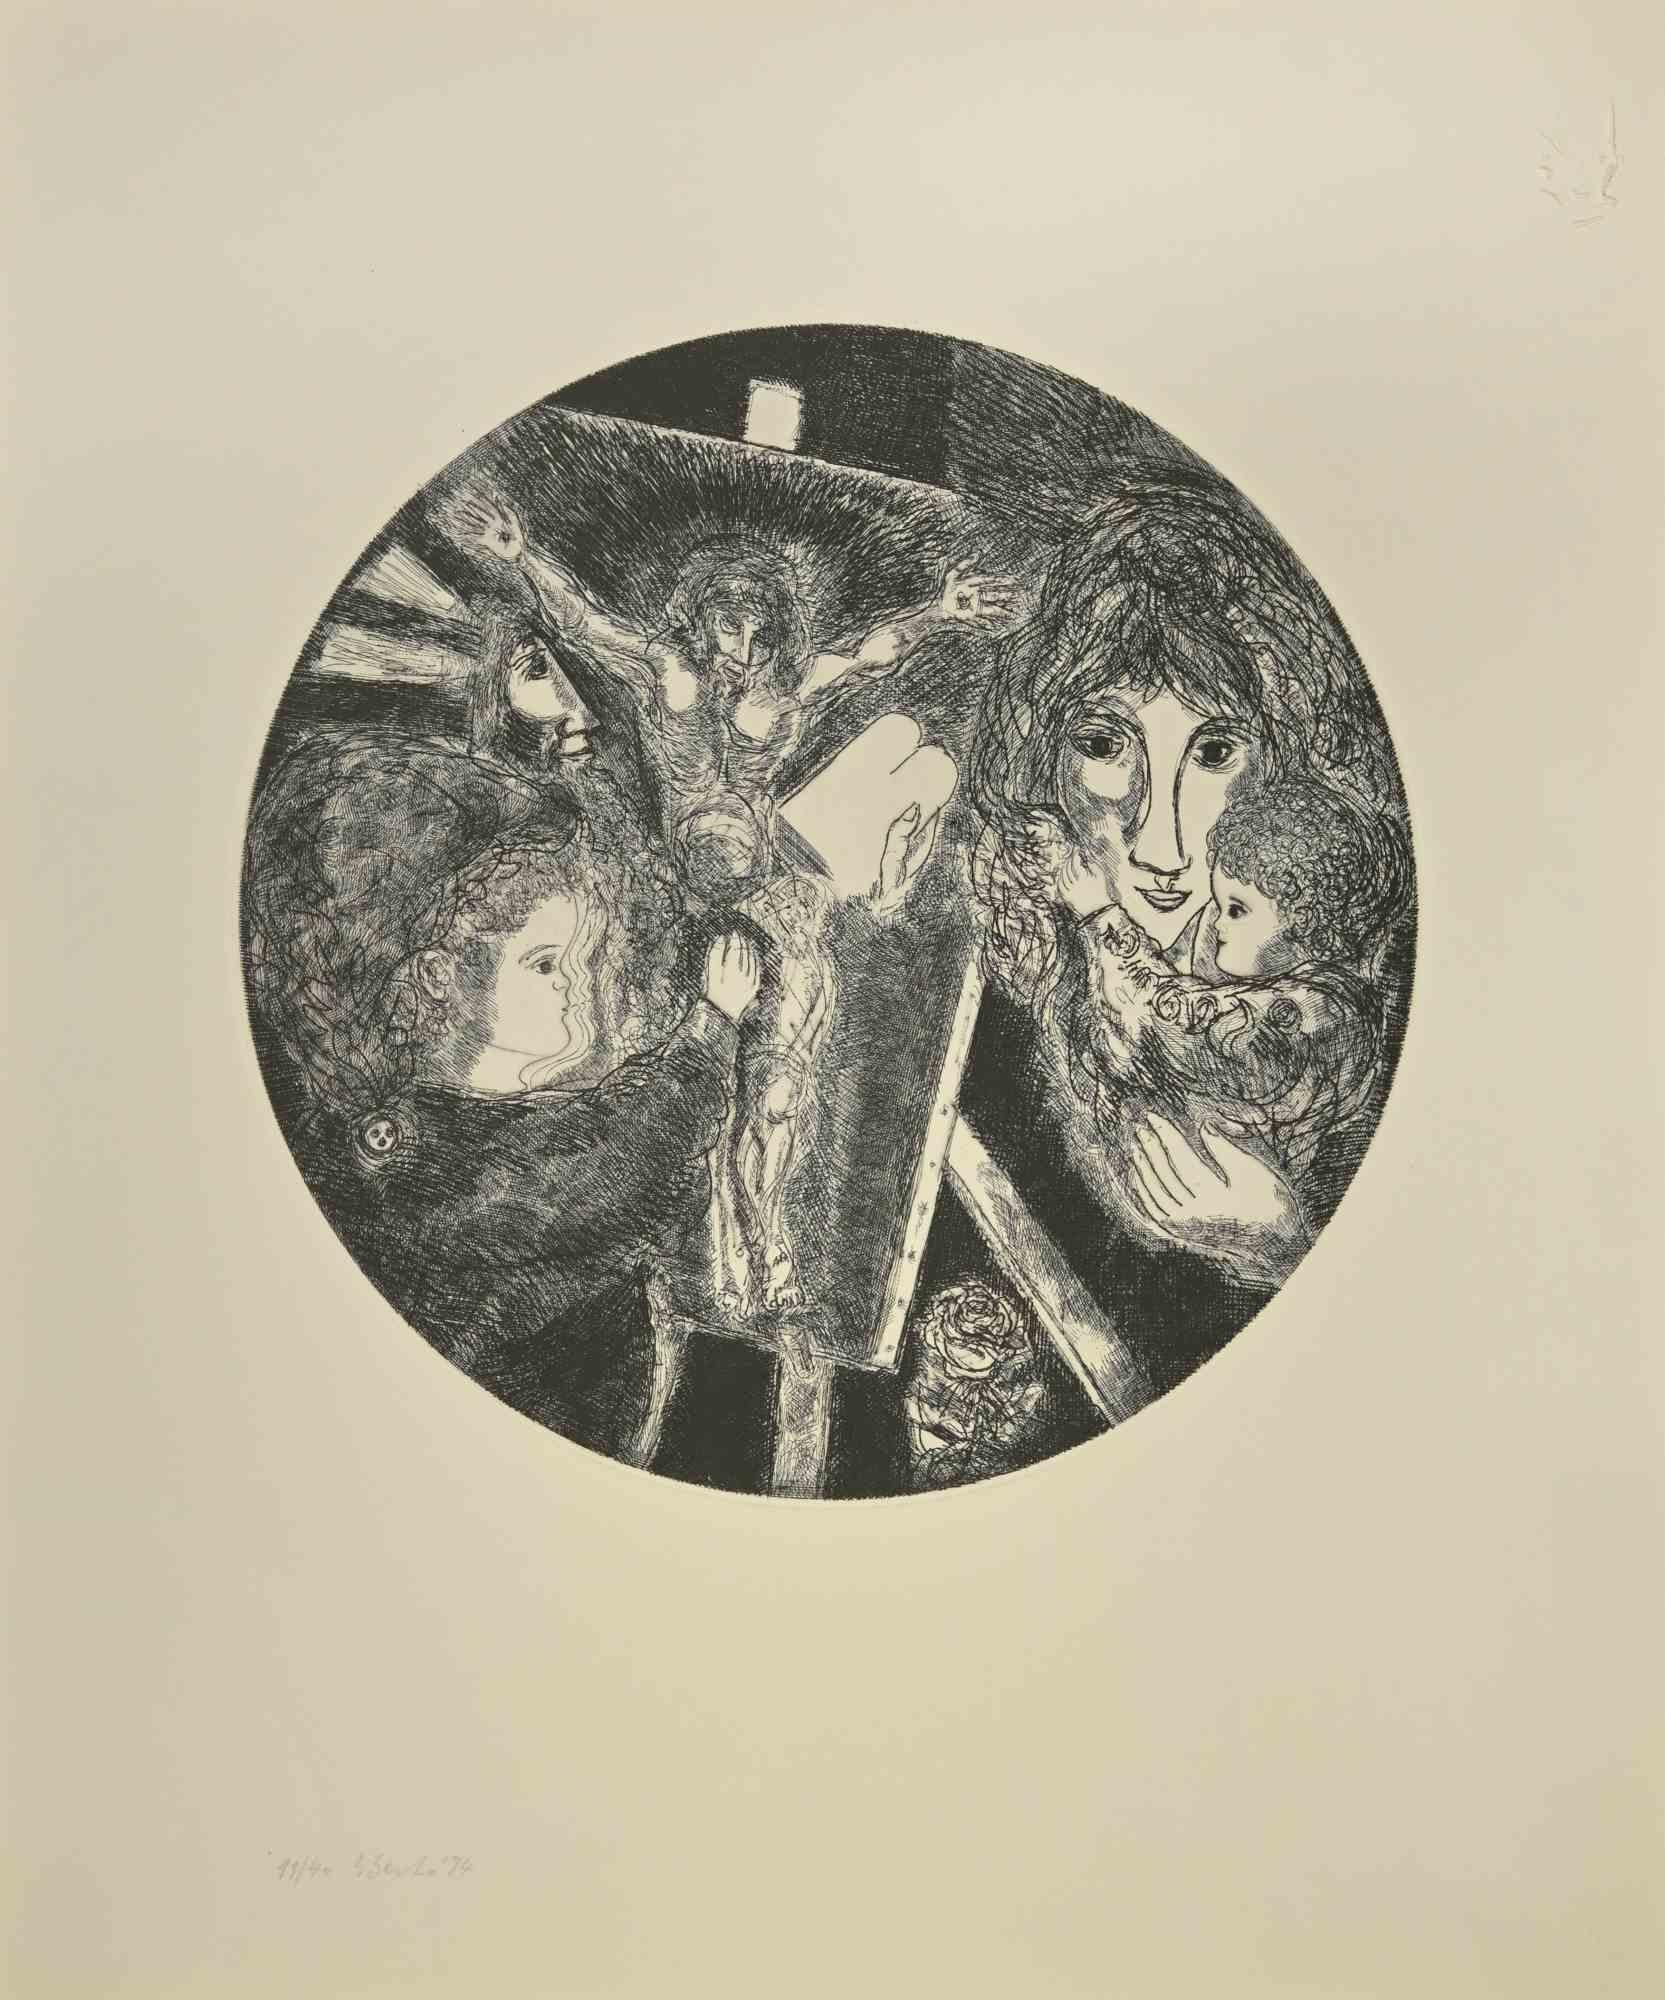 The Crucifixion is an etching and drypoint on paper realized by  Gian Paolo Berto in 1974.

Good conditions, except for light scratches at the top margins.

Hand-signed and numbered, edition of 40 prints.

The artwork represents  The Crucifixion. 